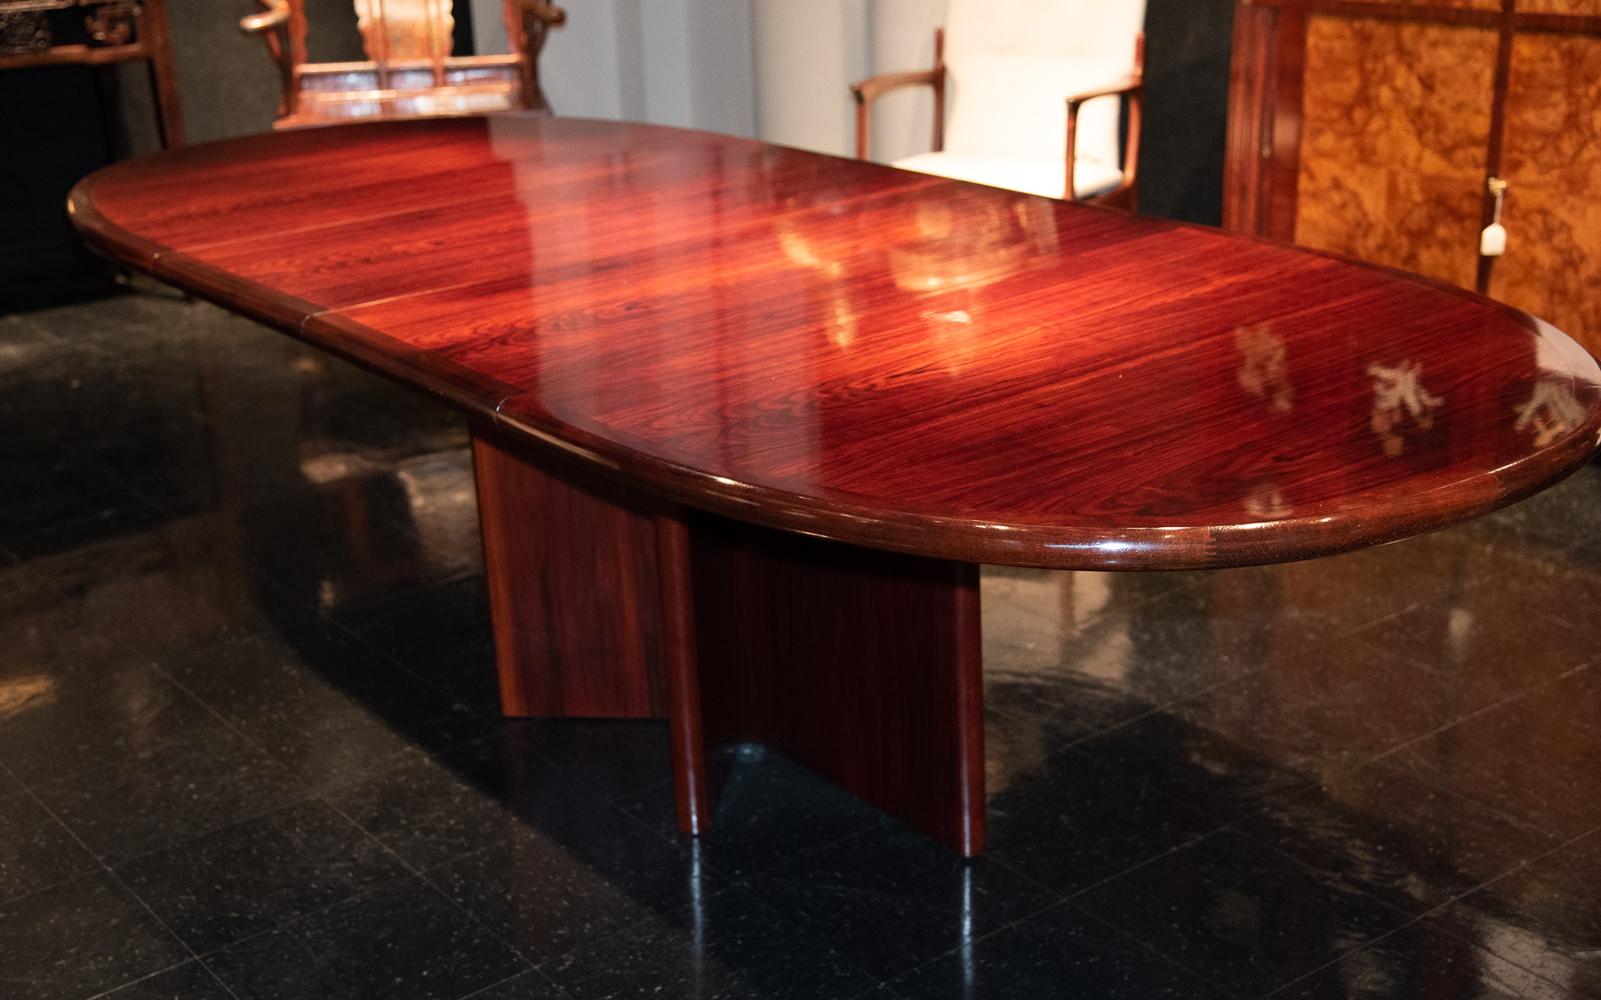 Rosewood Danish Mid-2th Century Dining or Conference Table